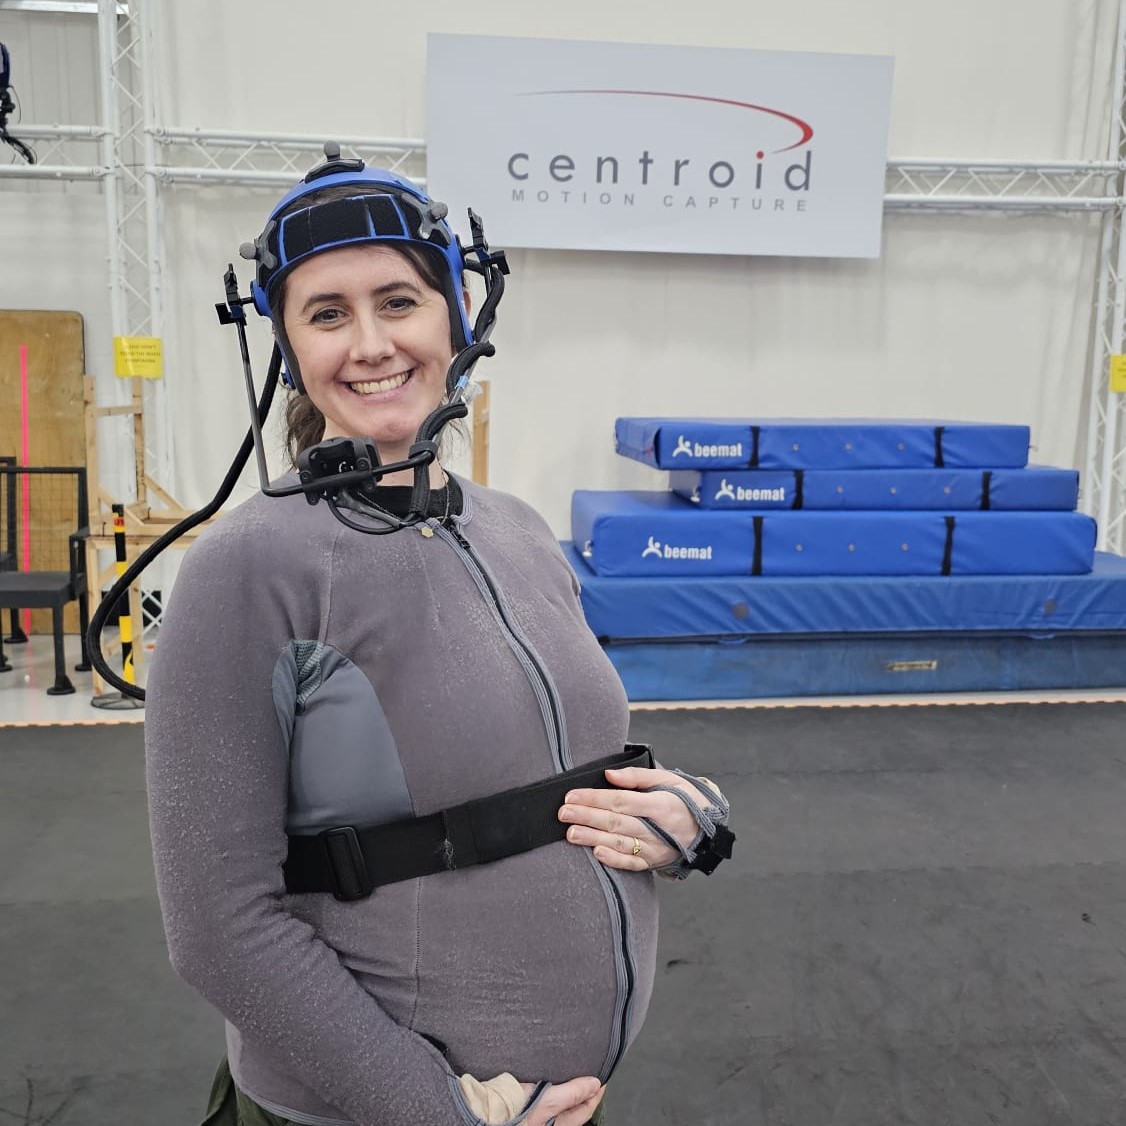 Here's something a little different! Today, we fitted a pregnant friend of Centroid's in a HMC, ready for an upcoming shoot featuring a talented pregnant performer. Can confirm that it was all fitted comfortably! 🤰🎬 #PCAP #mocap #MotionCaptureMagic #BehindTheScenes 🌟🎥